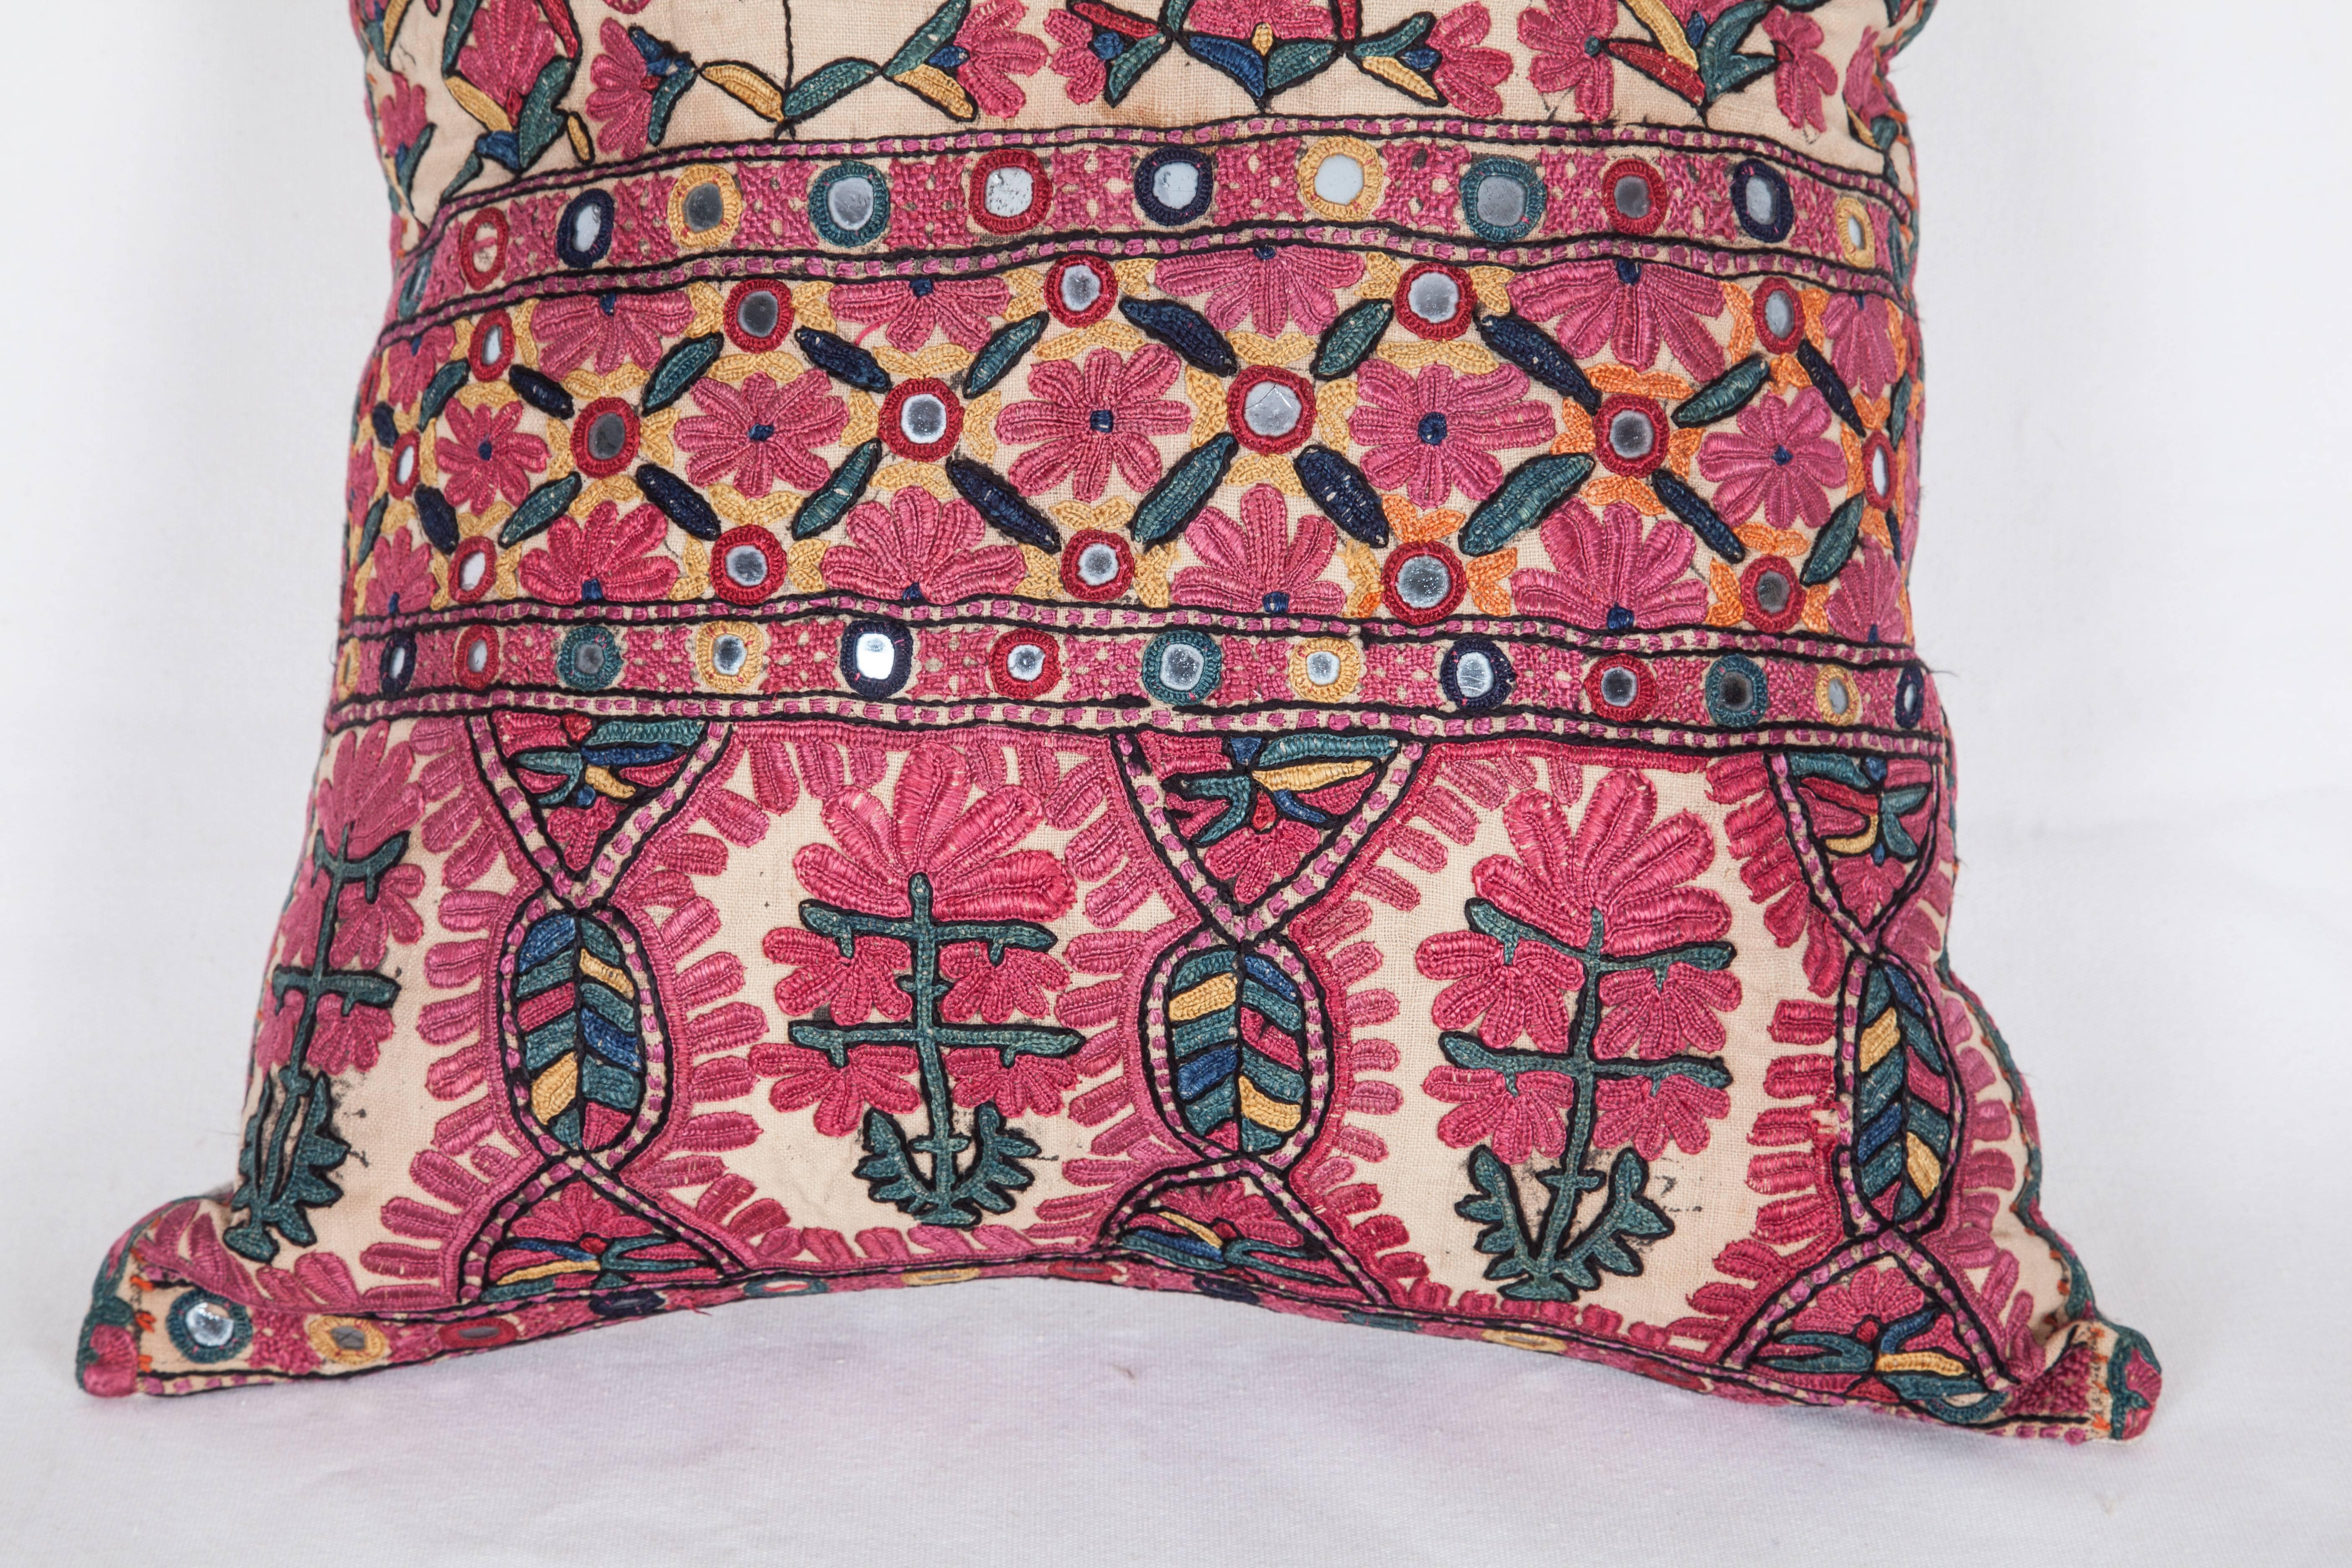 The pillow is made out of a late 19th century. Sind silk embroidery. It does not come with an insert but it comes with a bag made to the size and out of cotton to accommodate the filling. The backing is made of linen. Please note ' filling is not